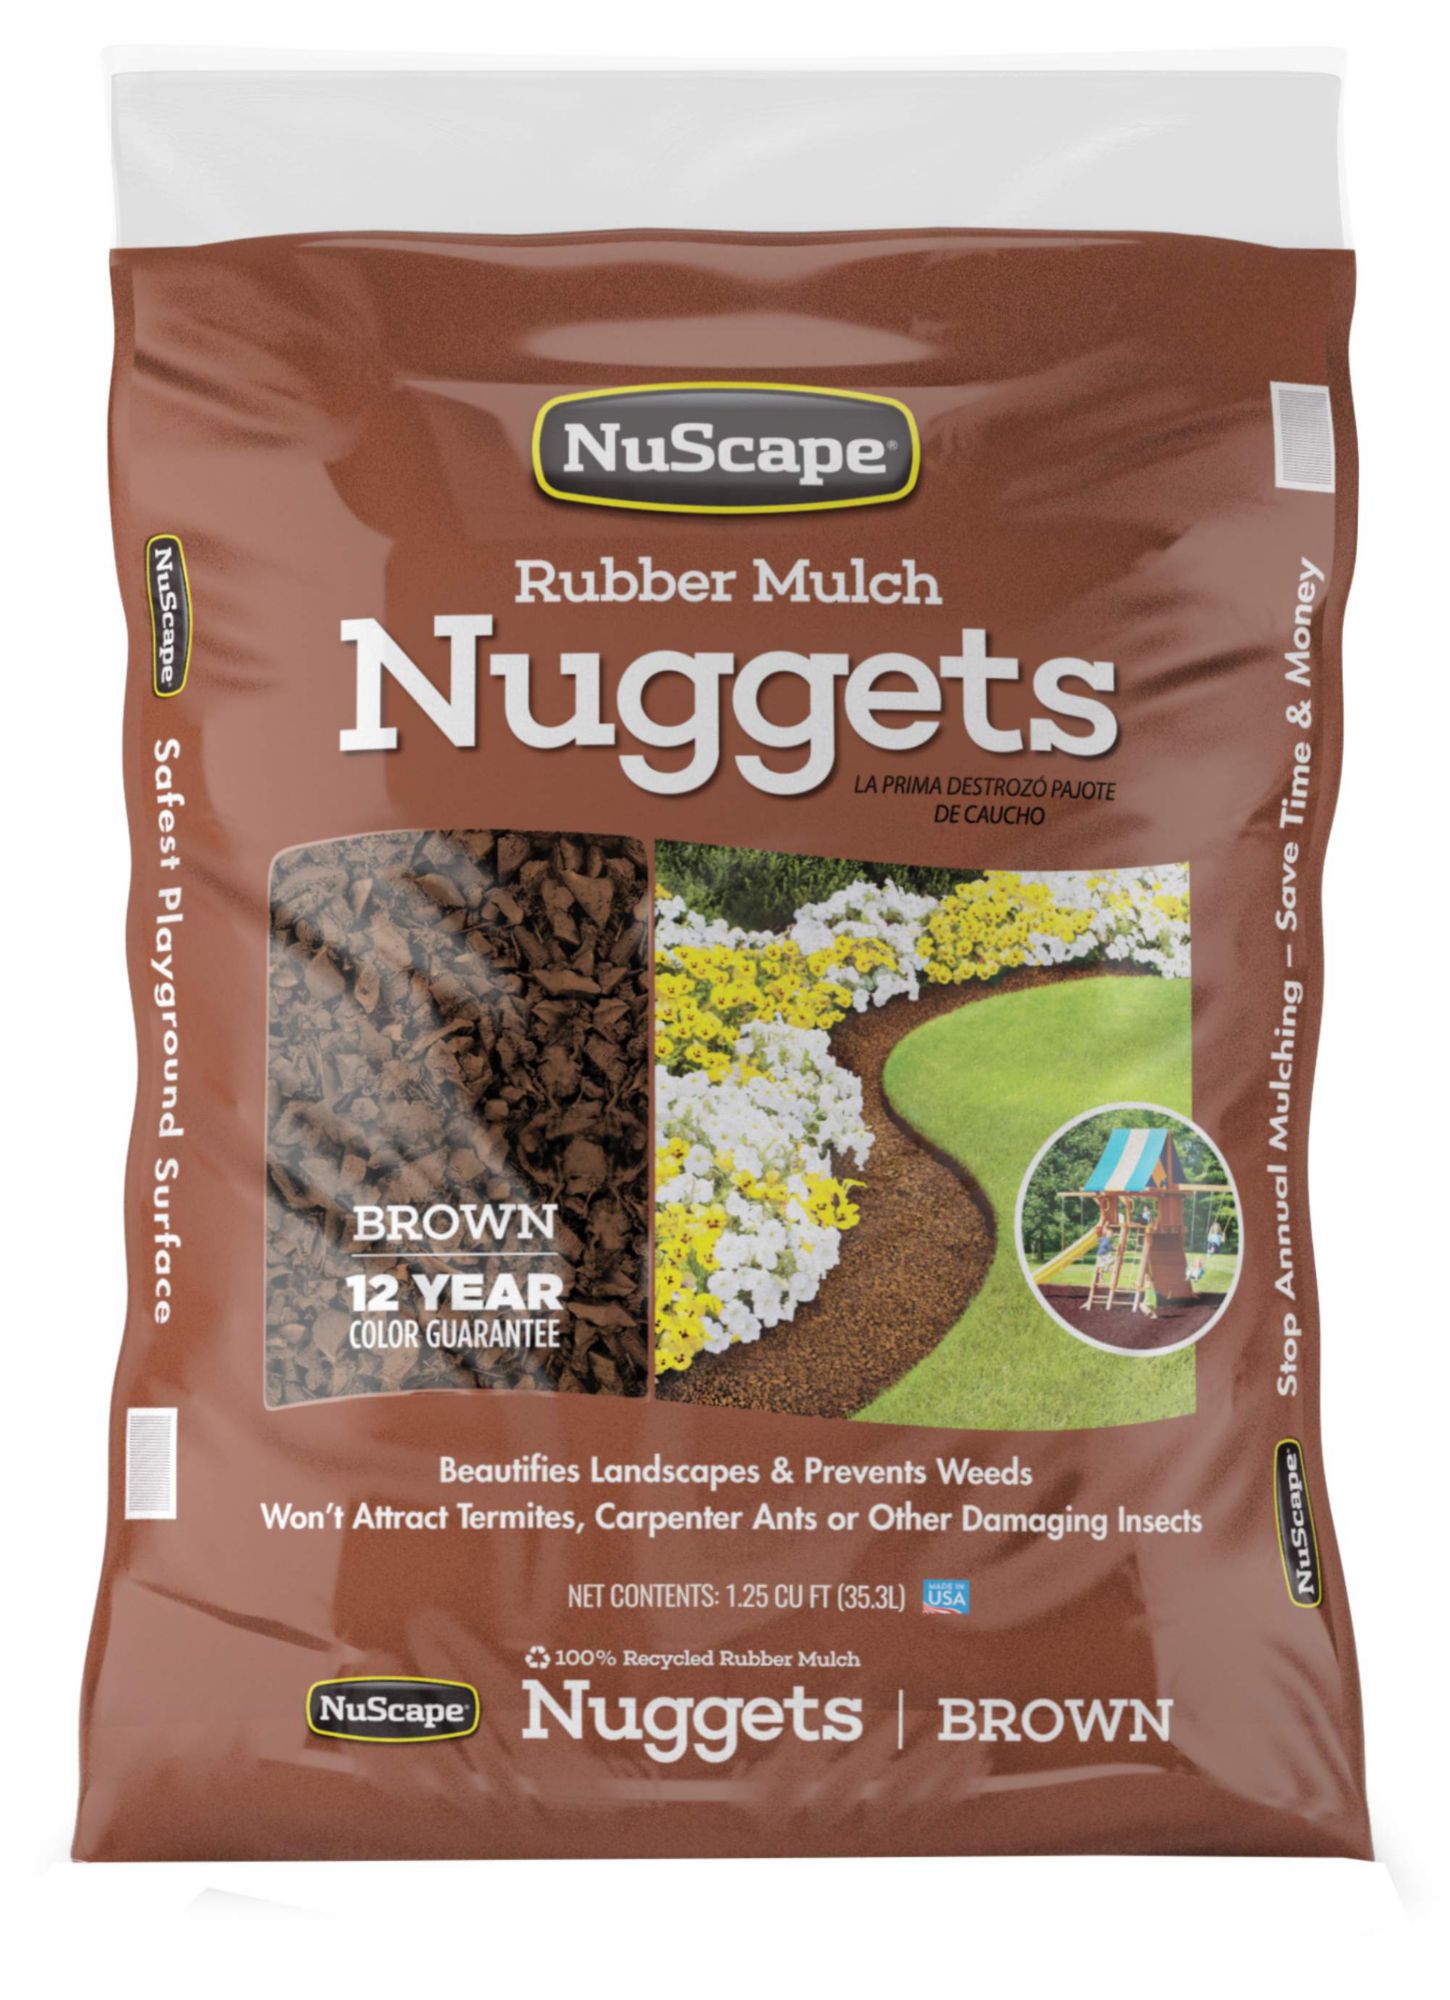 NuScape Rubber Mulch Nuggets, 1.25 Cu. Ft. - Red | BJ's Wholesale Club